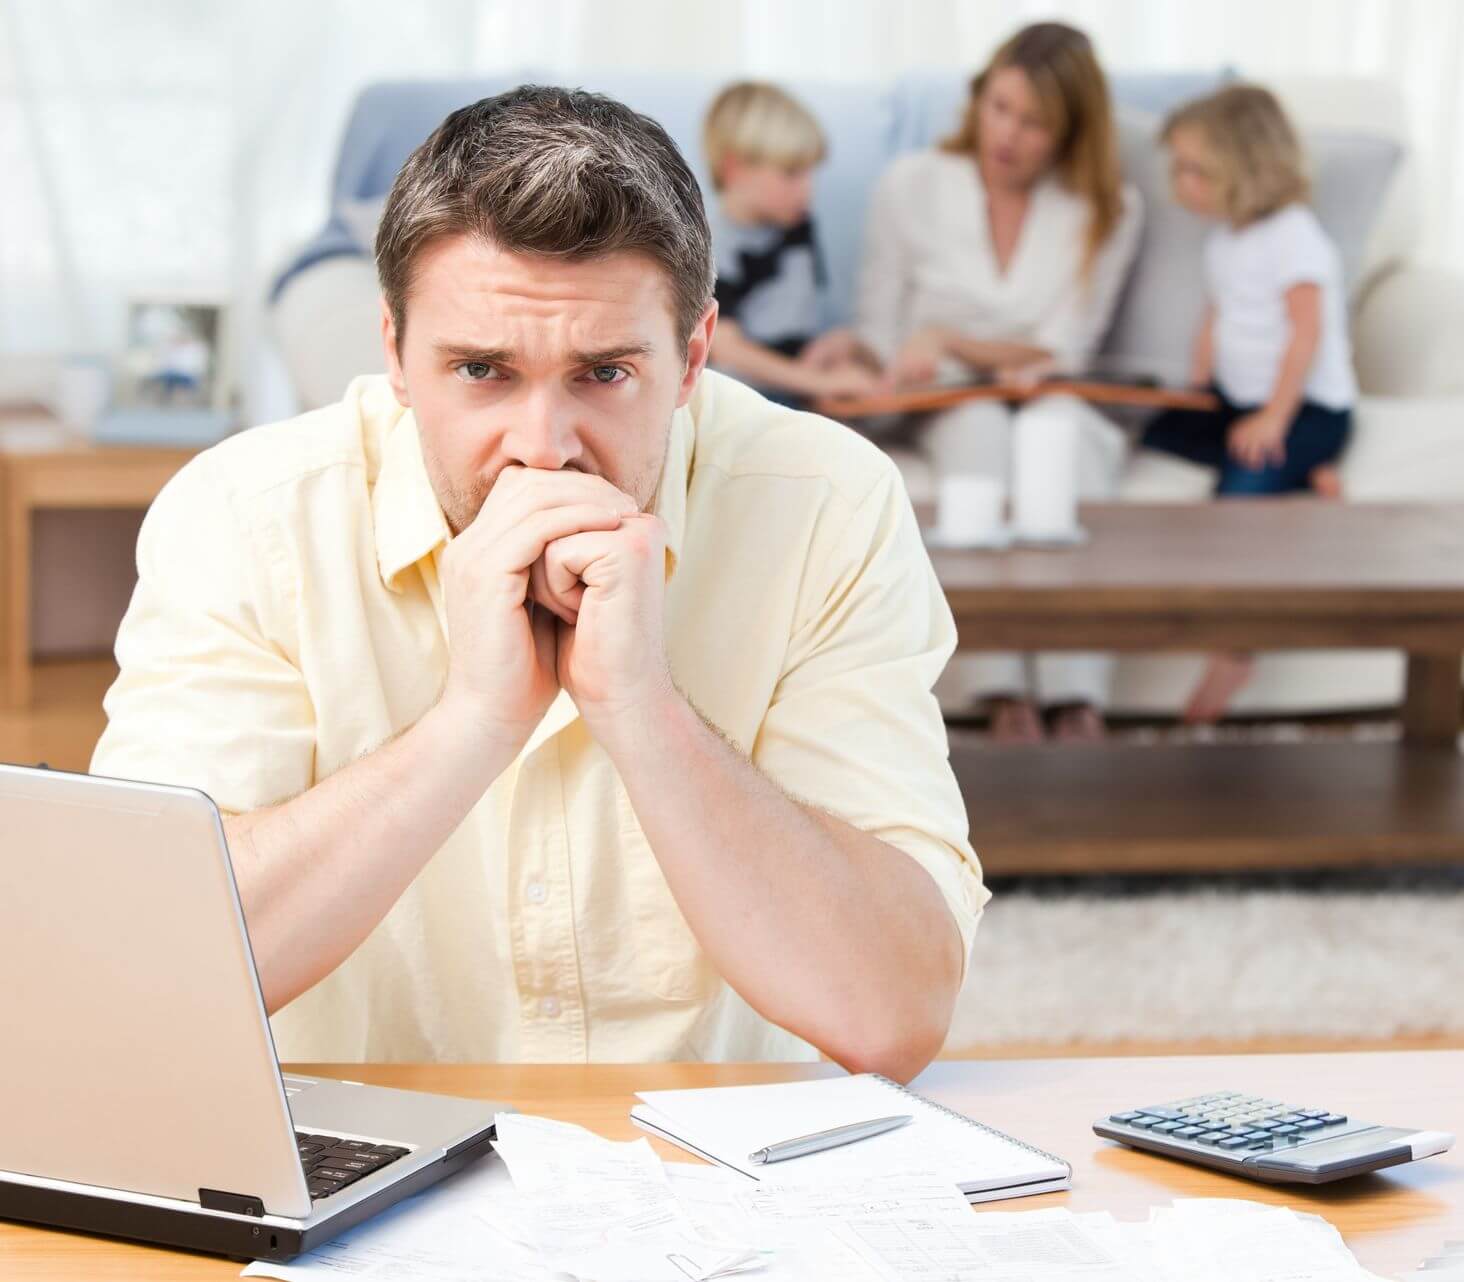 Father stressed over finances while family sits in background